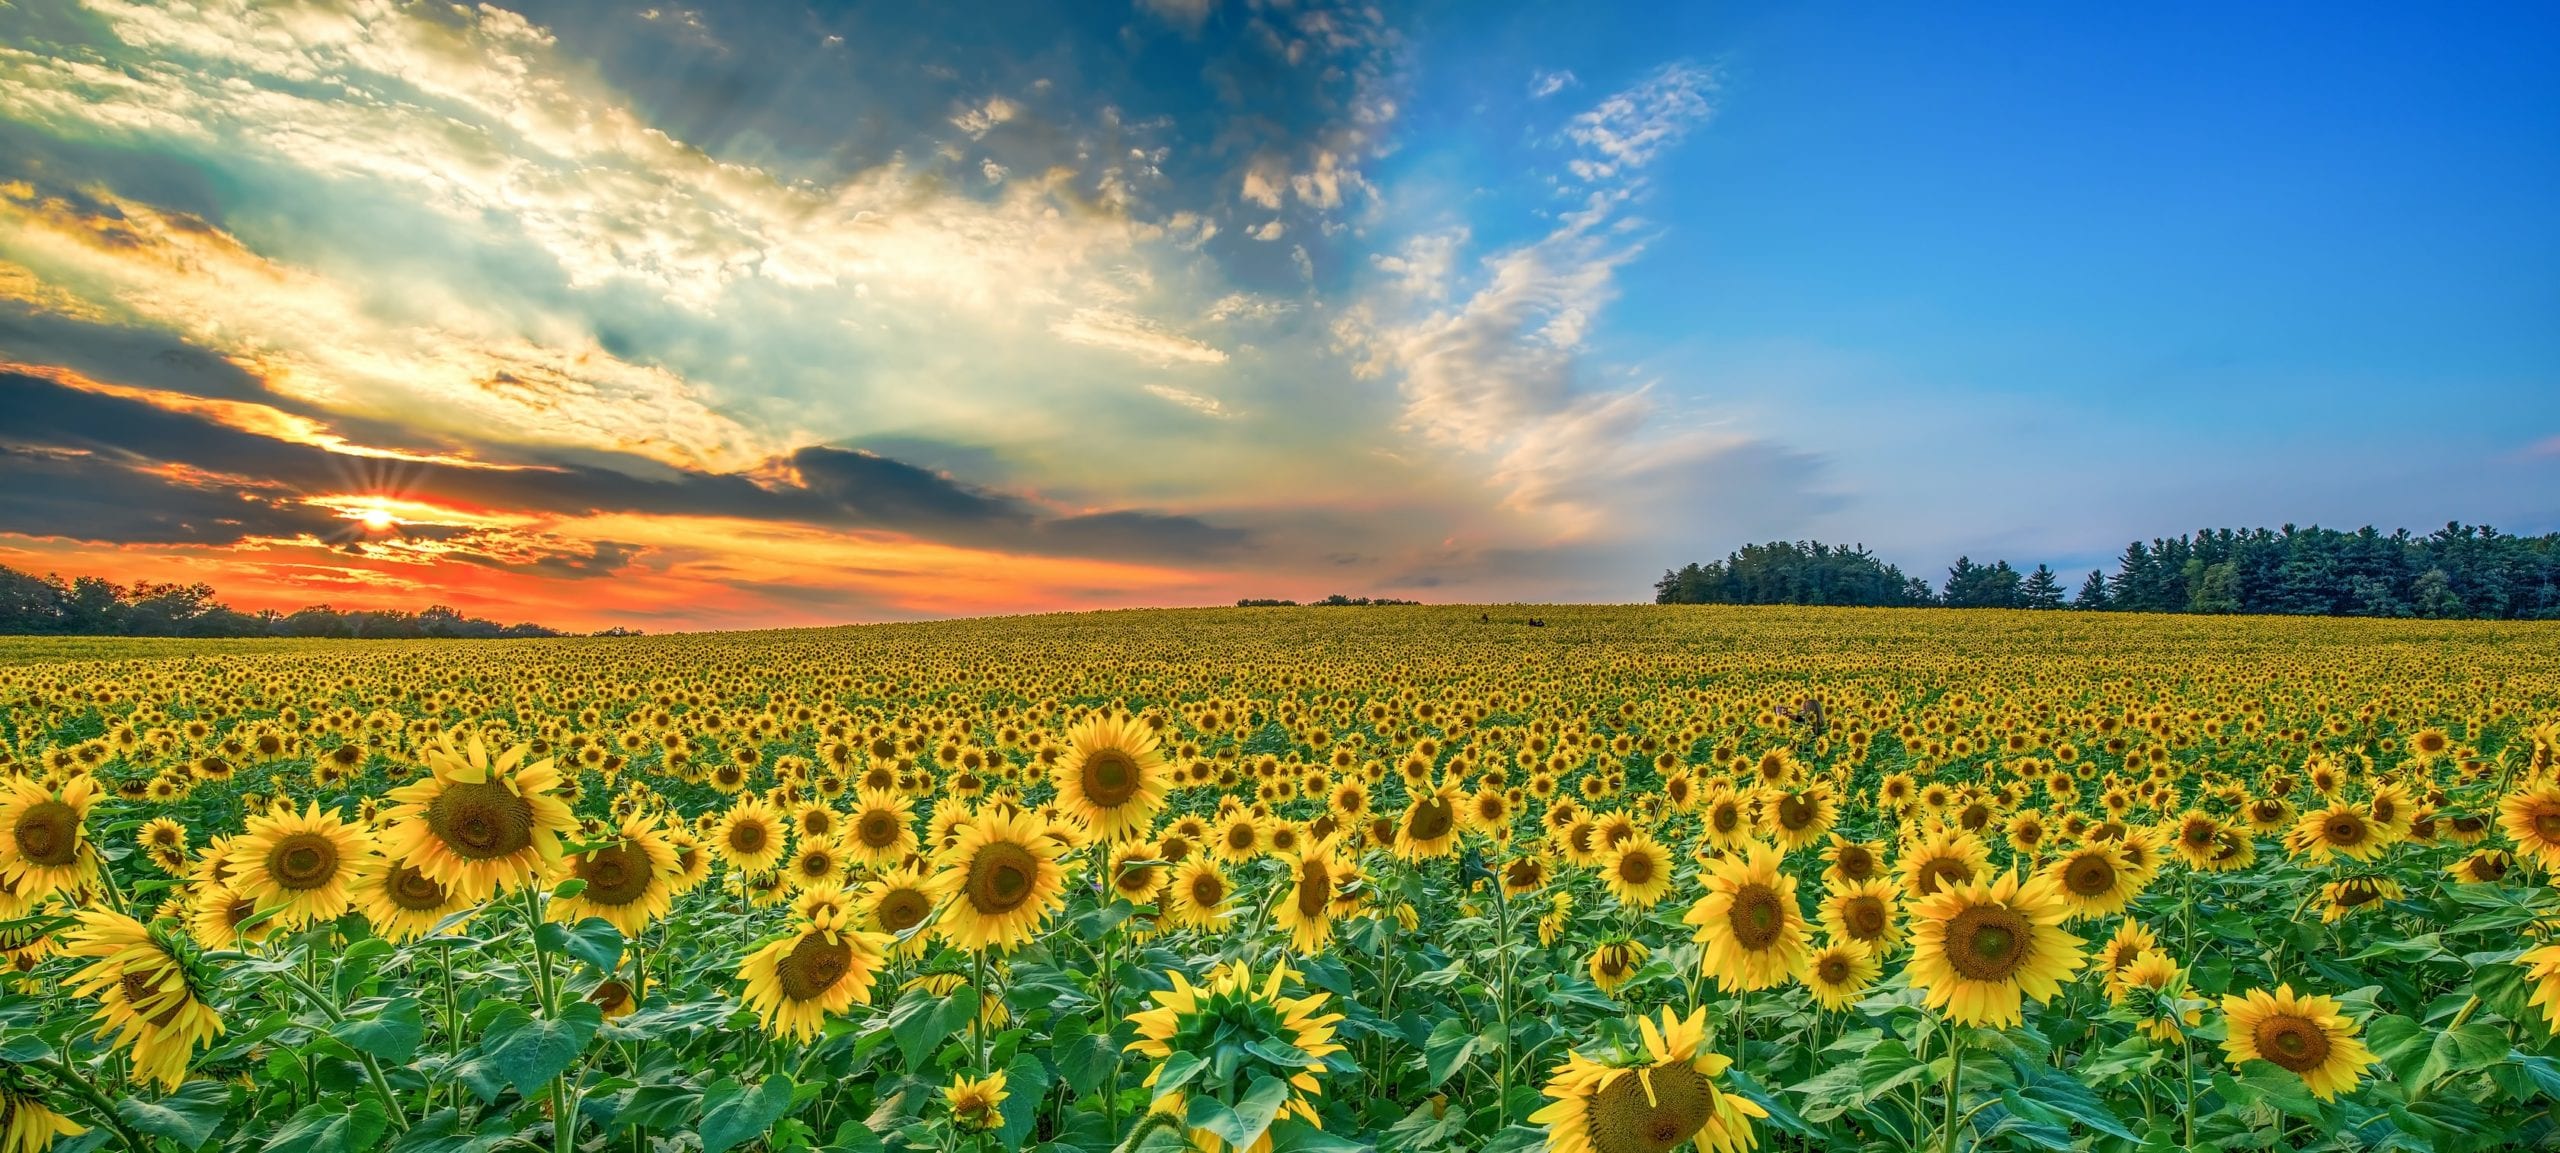 field of sunflowers and a beautiful sunset in the background